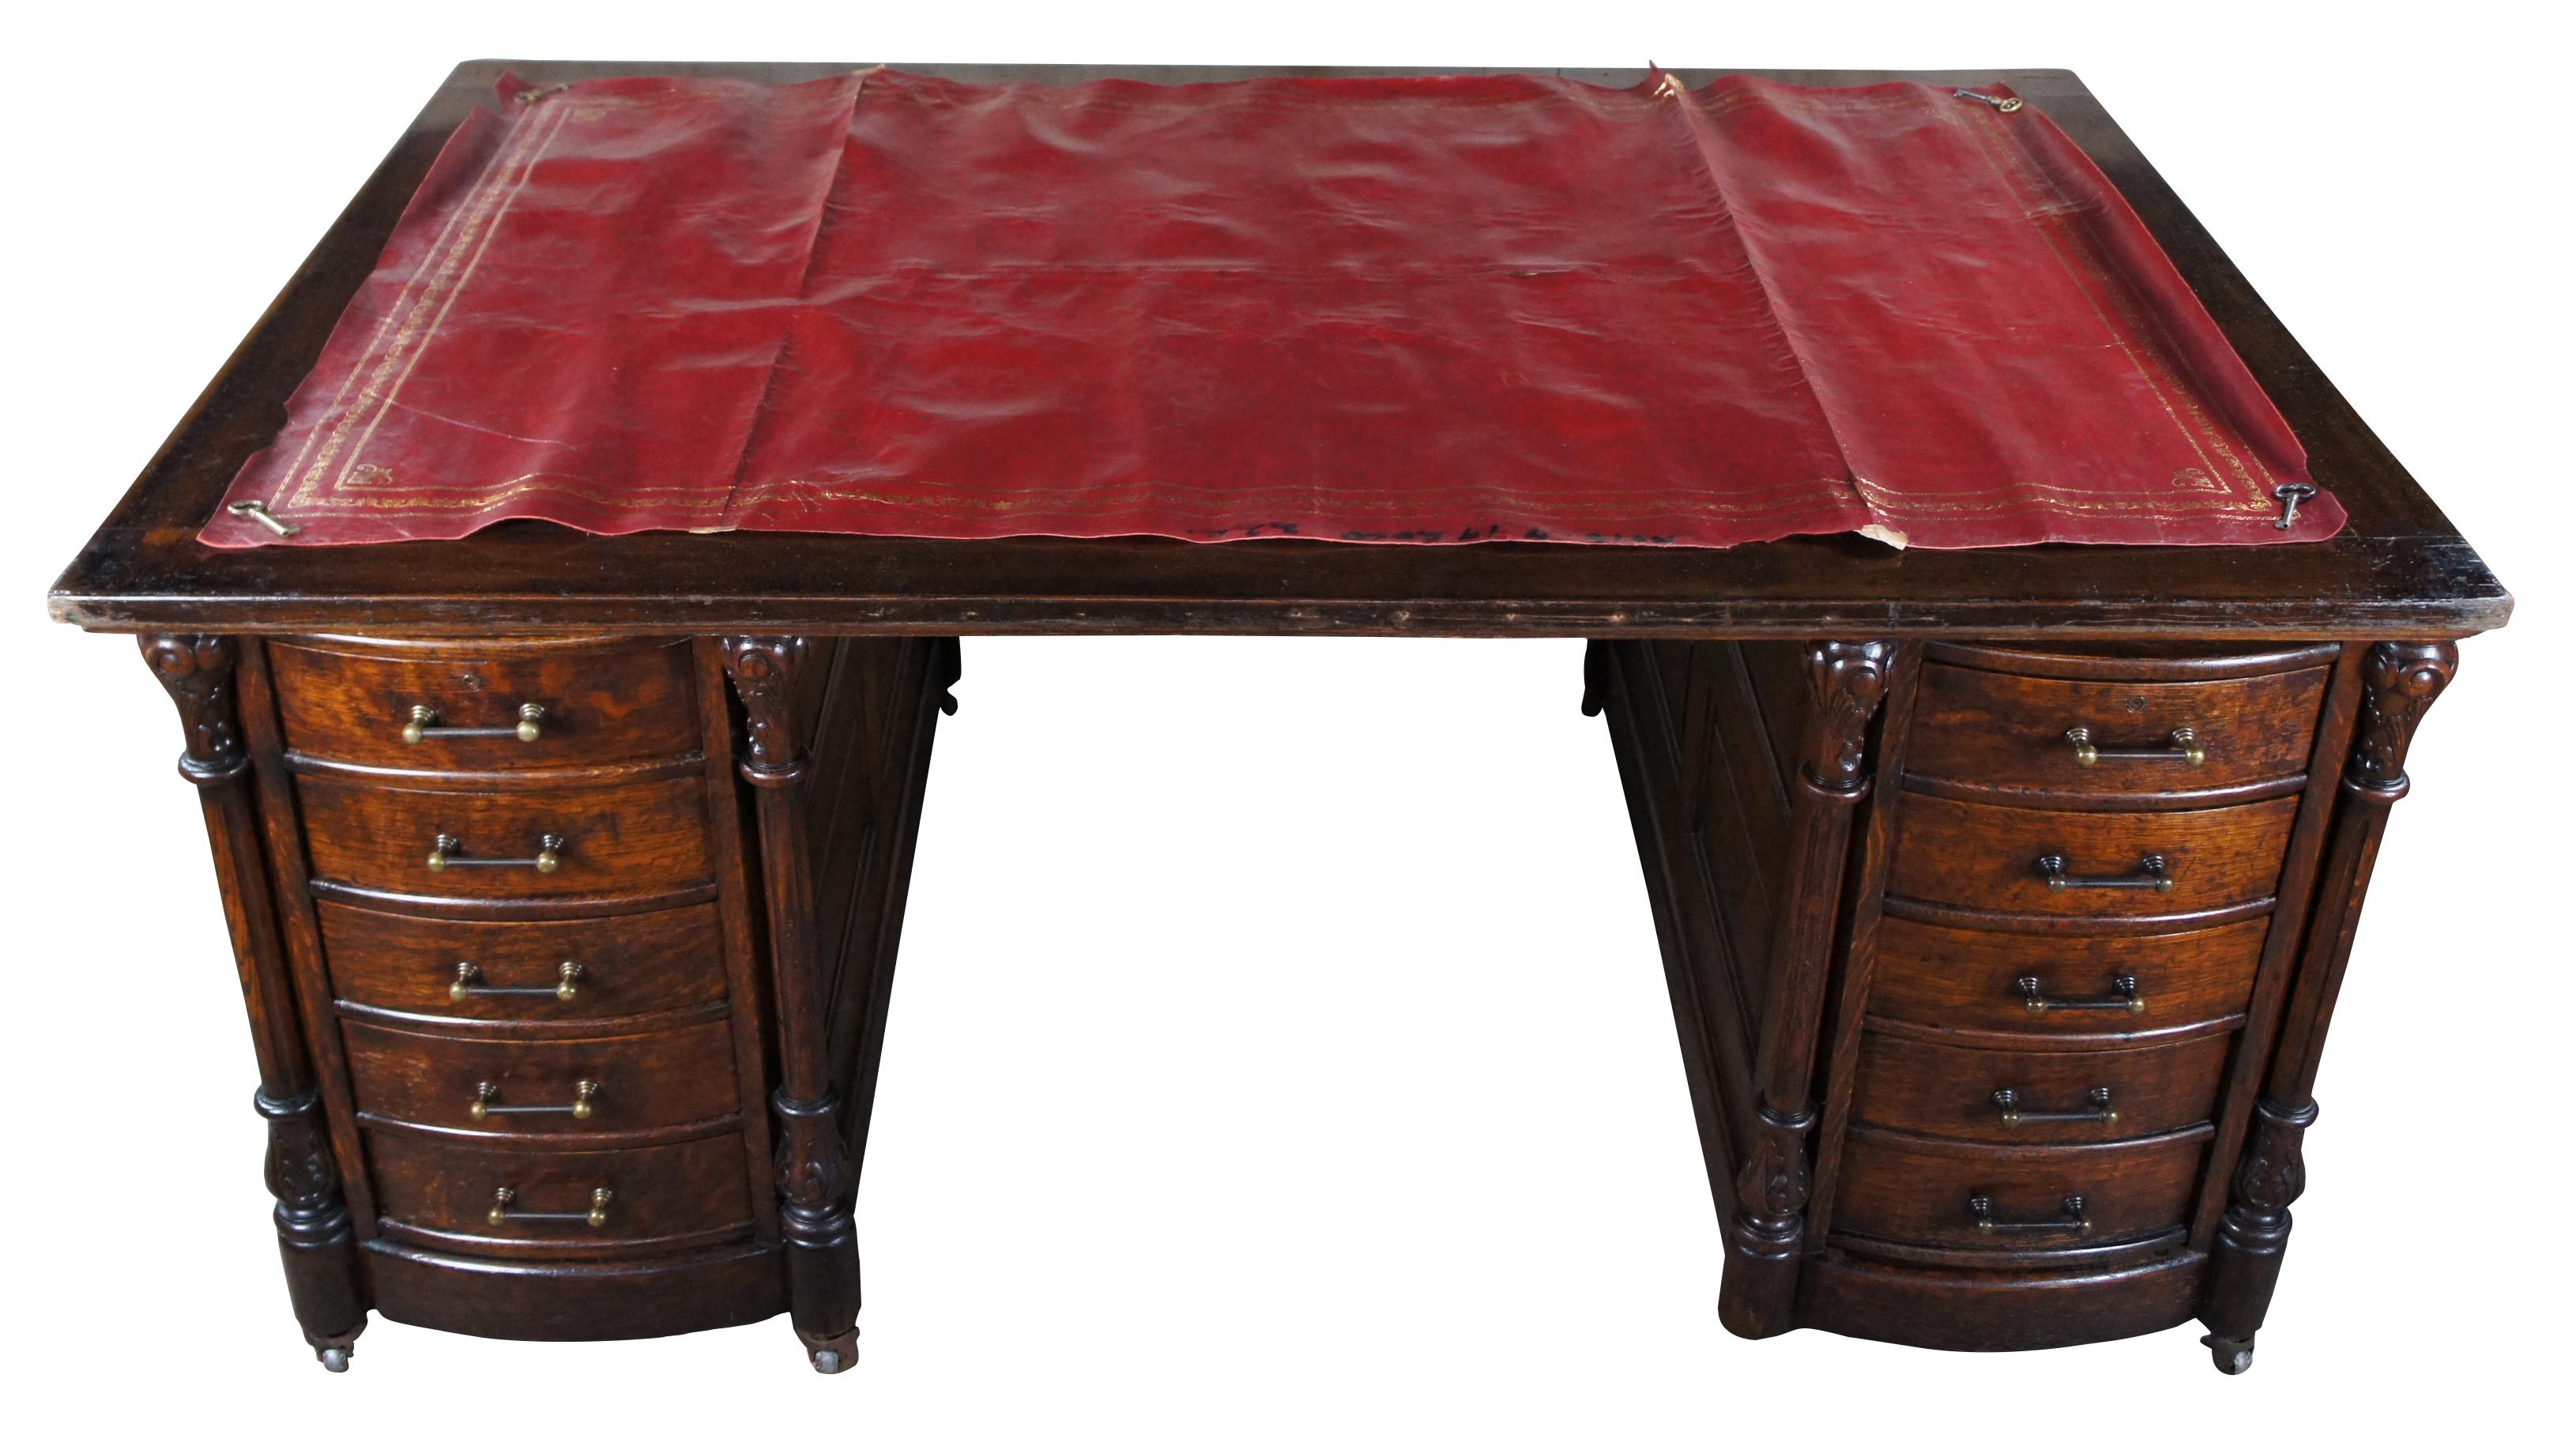 Antique tooled red or burgundy leather desk / table writing surface pad. Purchased in London in the 1980s.  Measures: 41